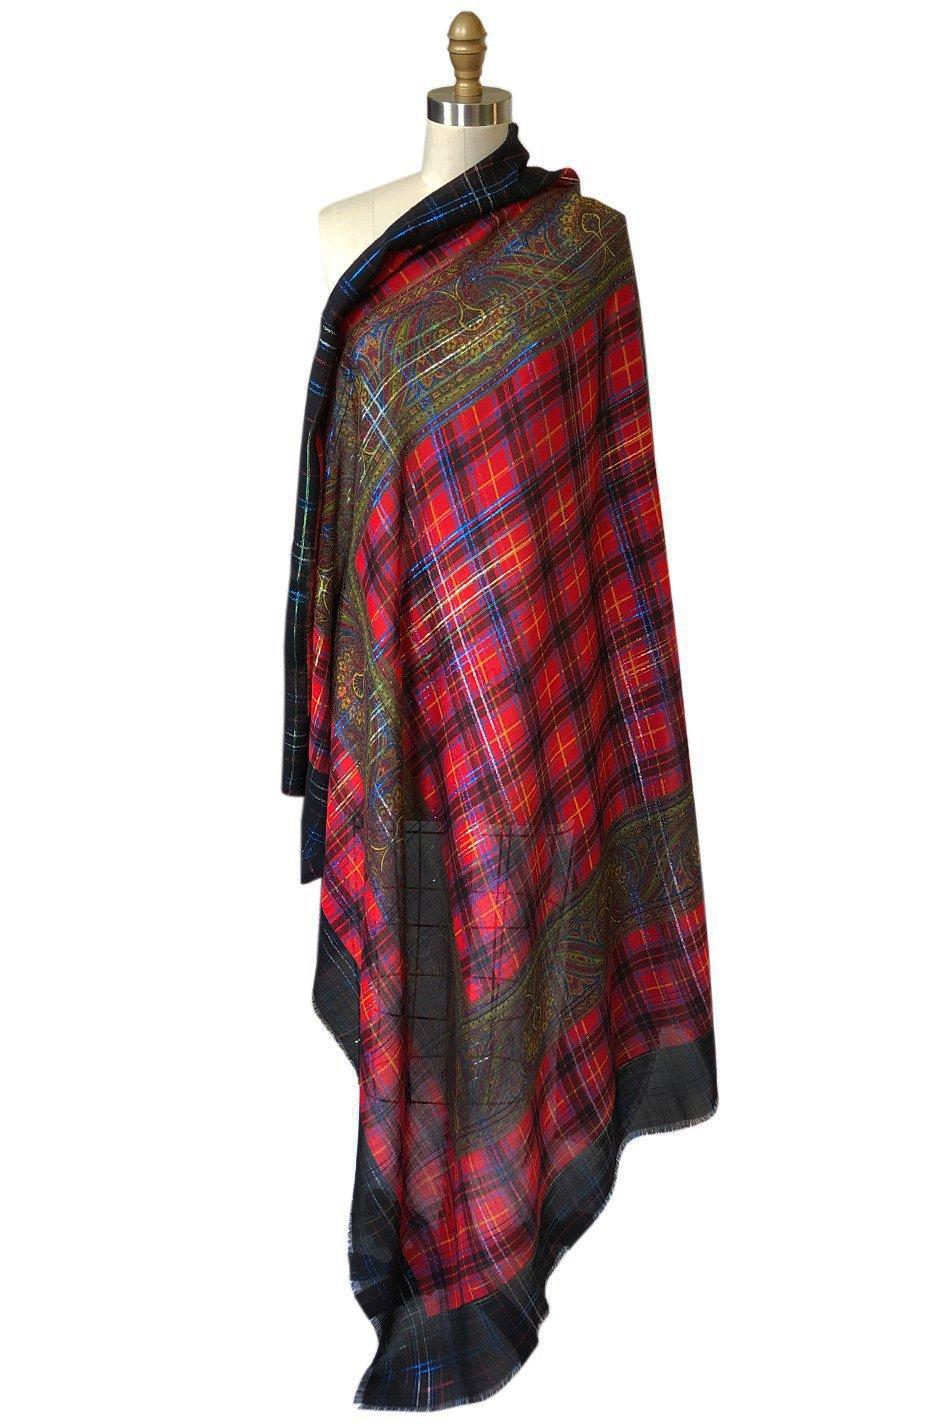 Gorgeous and absolutely huge, this Yves Saint Laurent plaid scarf is a mix of a bright red with a jet black border that is overlaid with shots of metallic blue and gold thread. The plaid surrounds a intricate paisley printed inner border that is